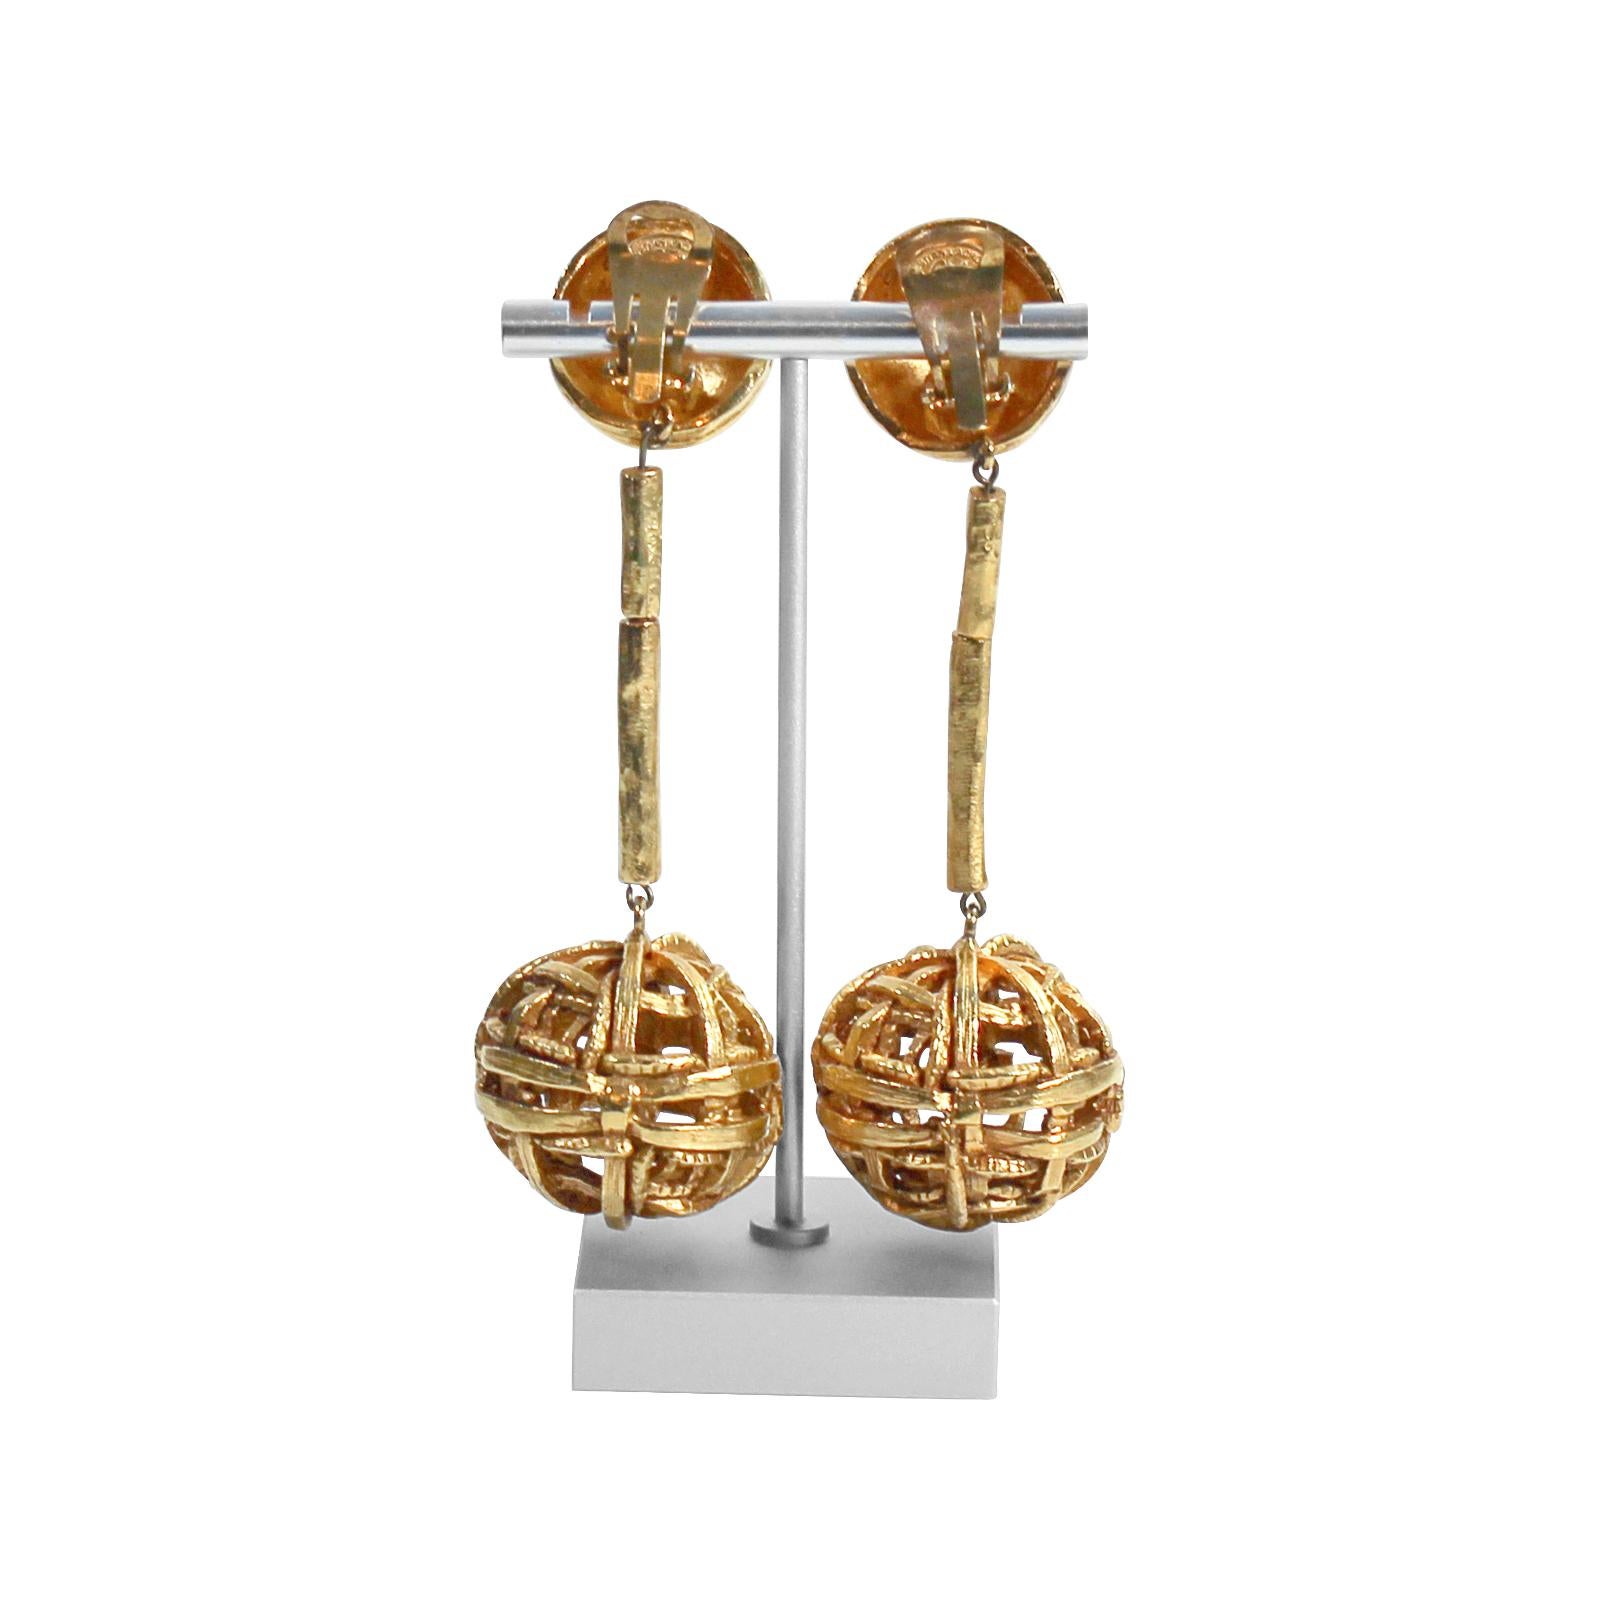 Vintage Christian Lacroix Gold Tone Dangling Ball Earrings, Circa 1990s In Good Condition For Sale In New York, NY